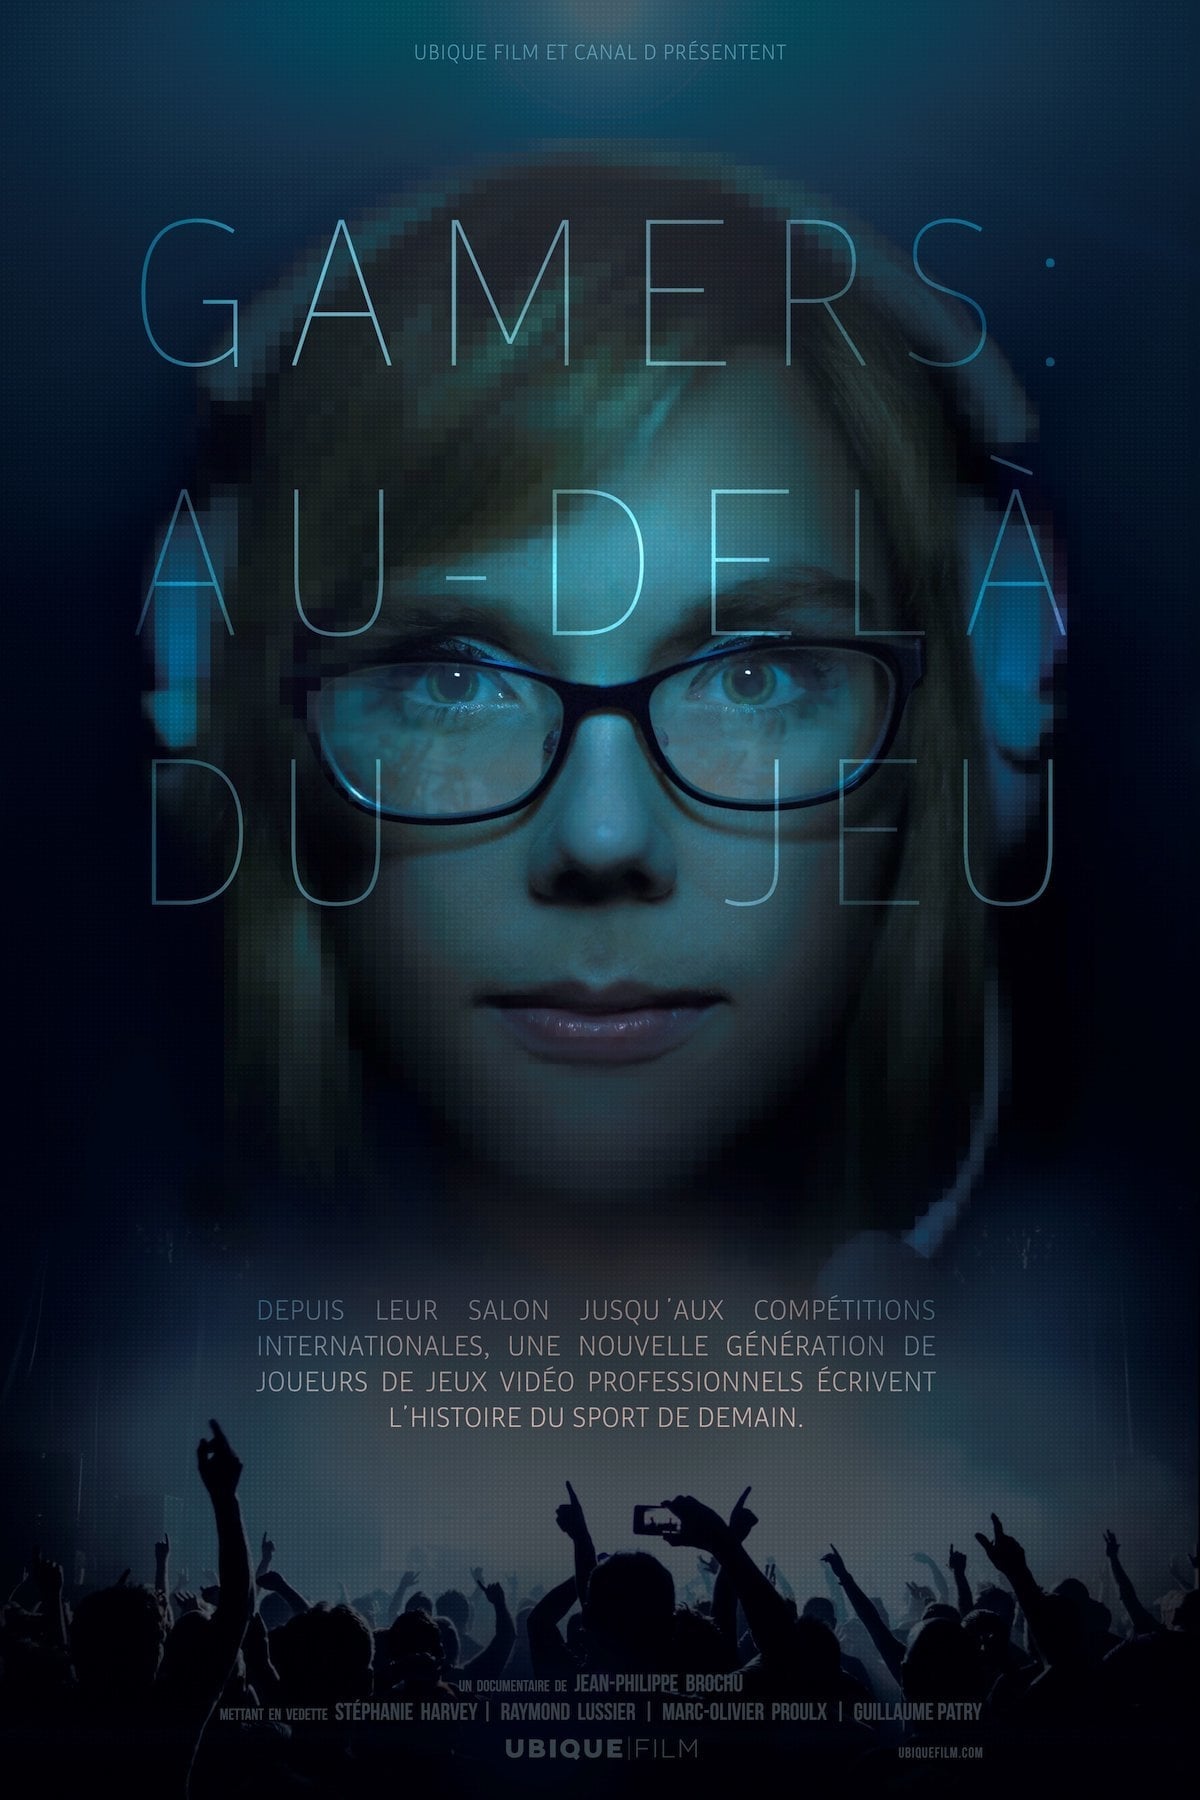 GAMERS: Beyond the game